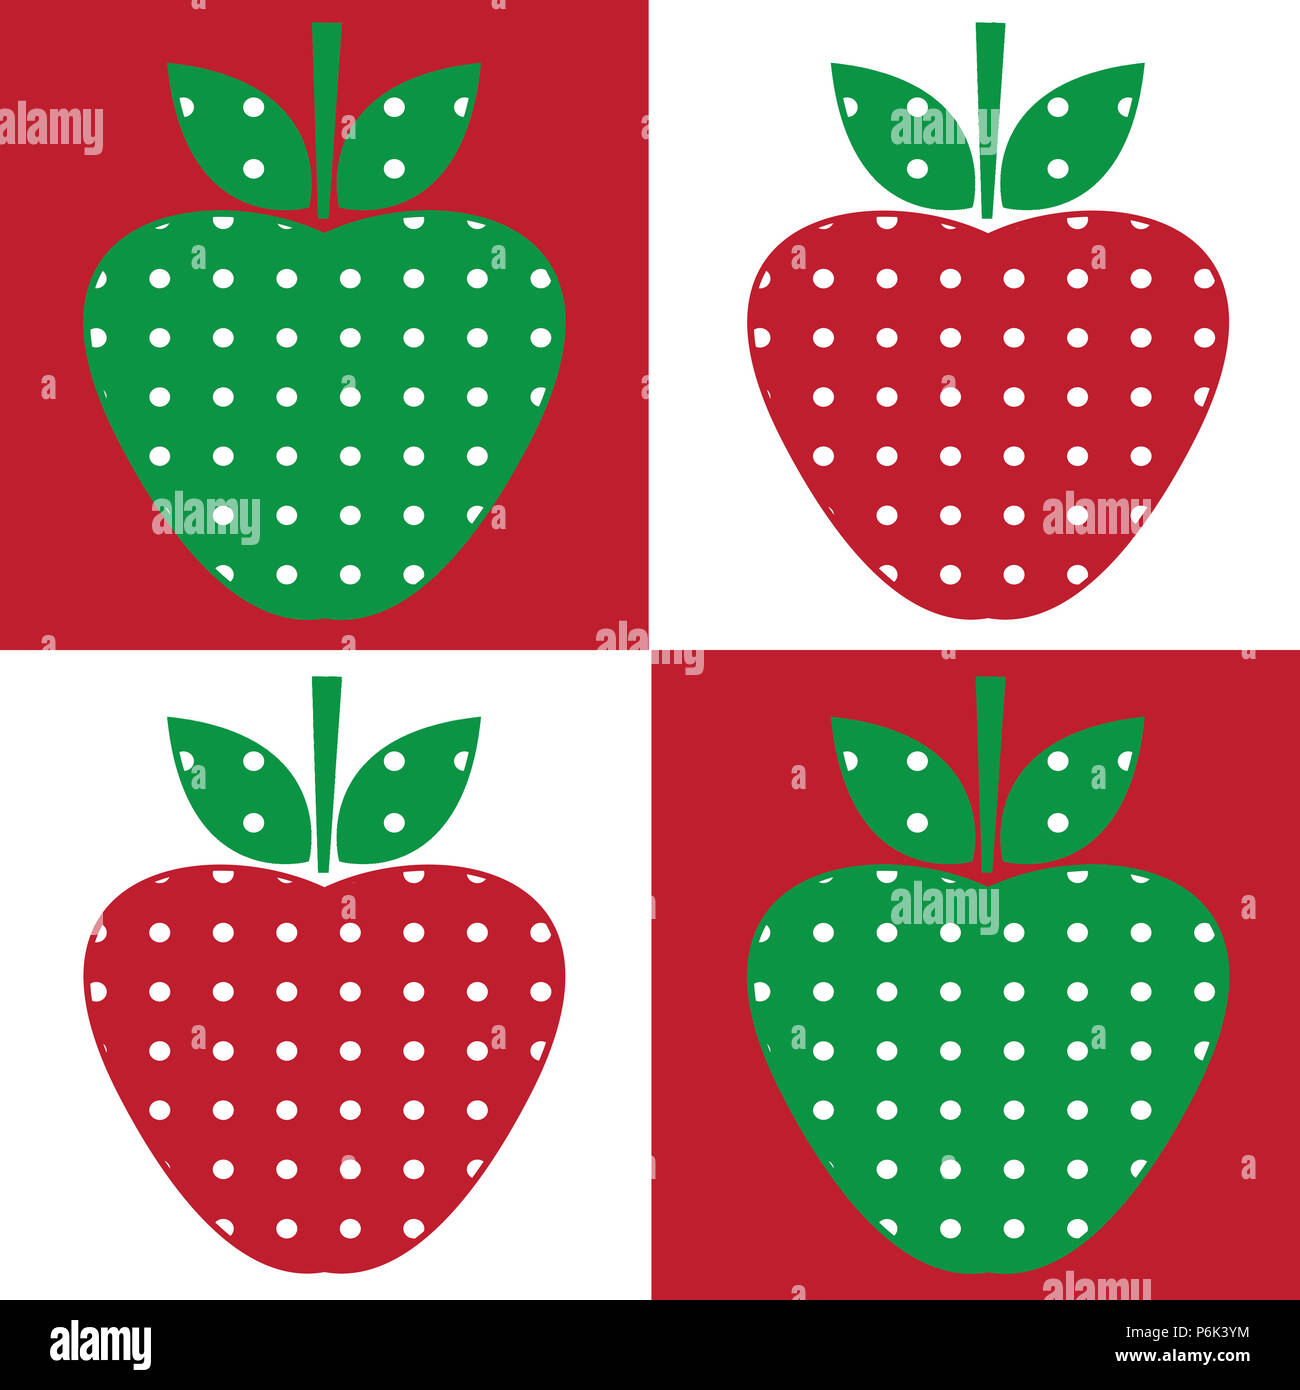 Illustration of red and green strawberries in a repeating pattern. Red and white background squares. Modern, clean, fresh. Stock Photo